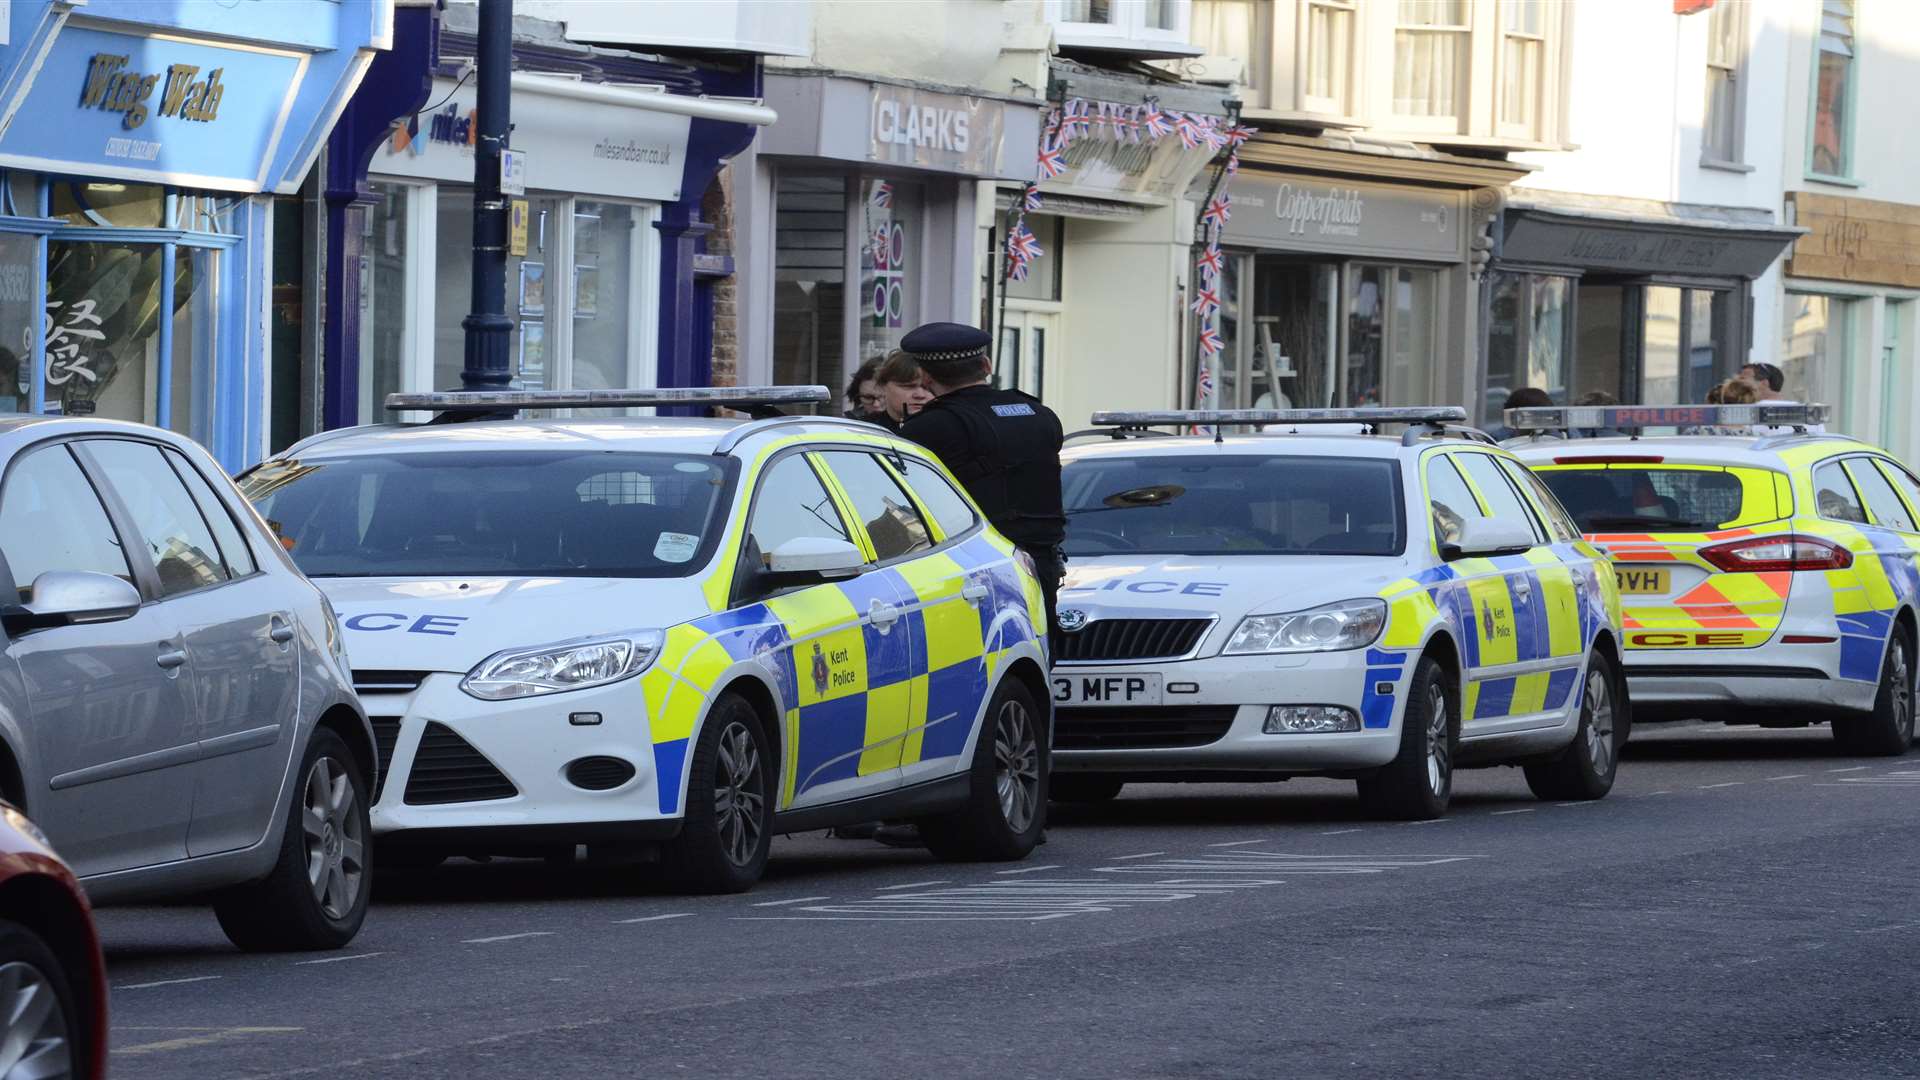 Police in High Street, Whitstable. Picture: Chris Davey.